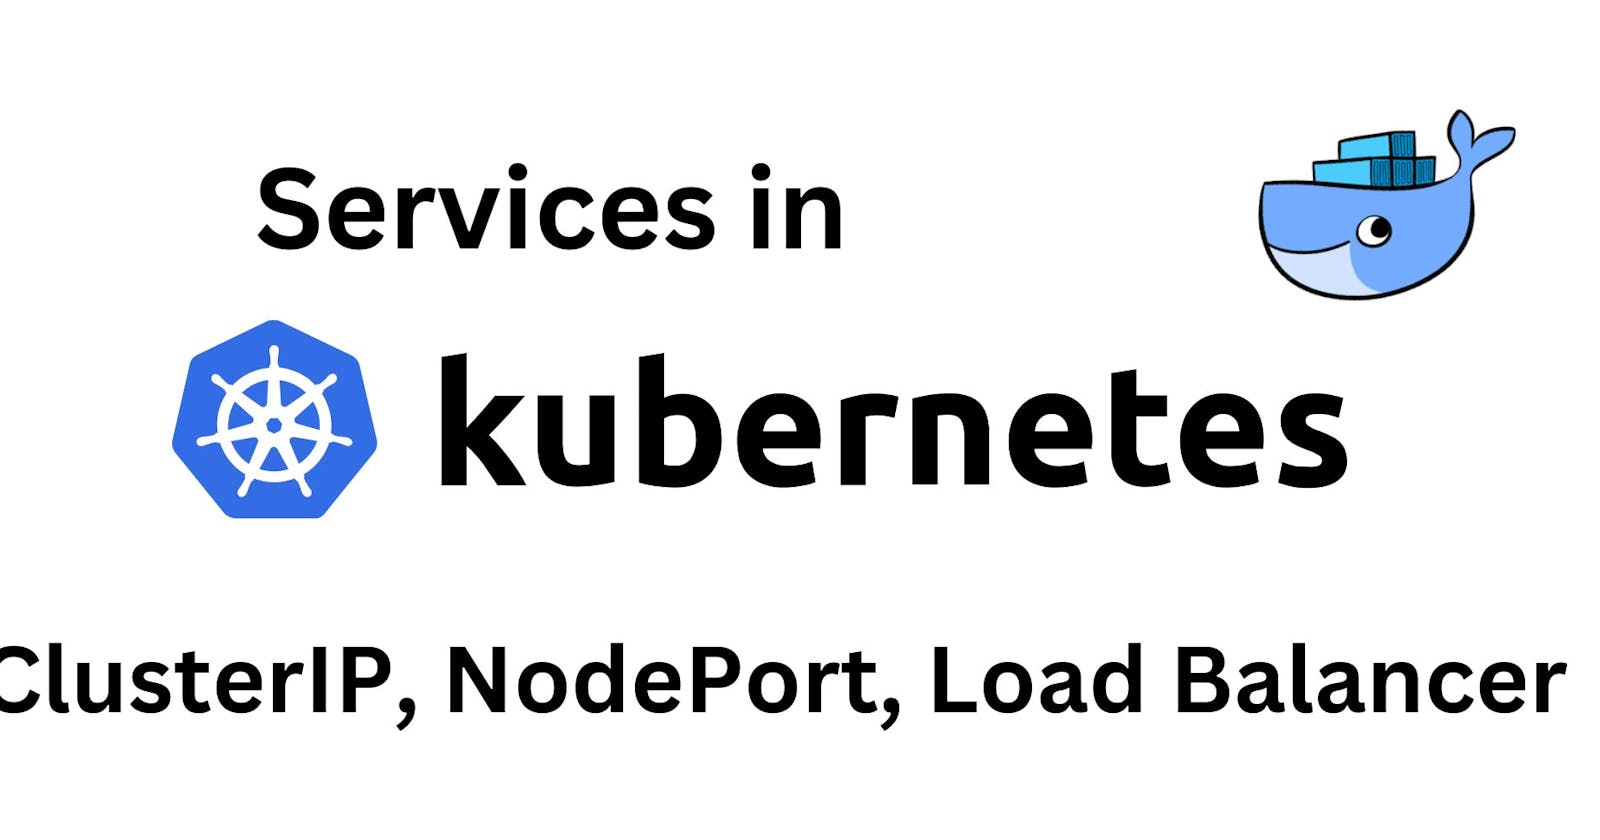 Service Object in Kubernetes